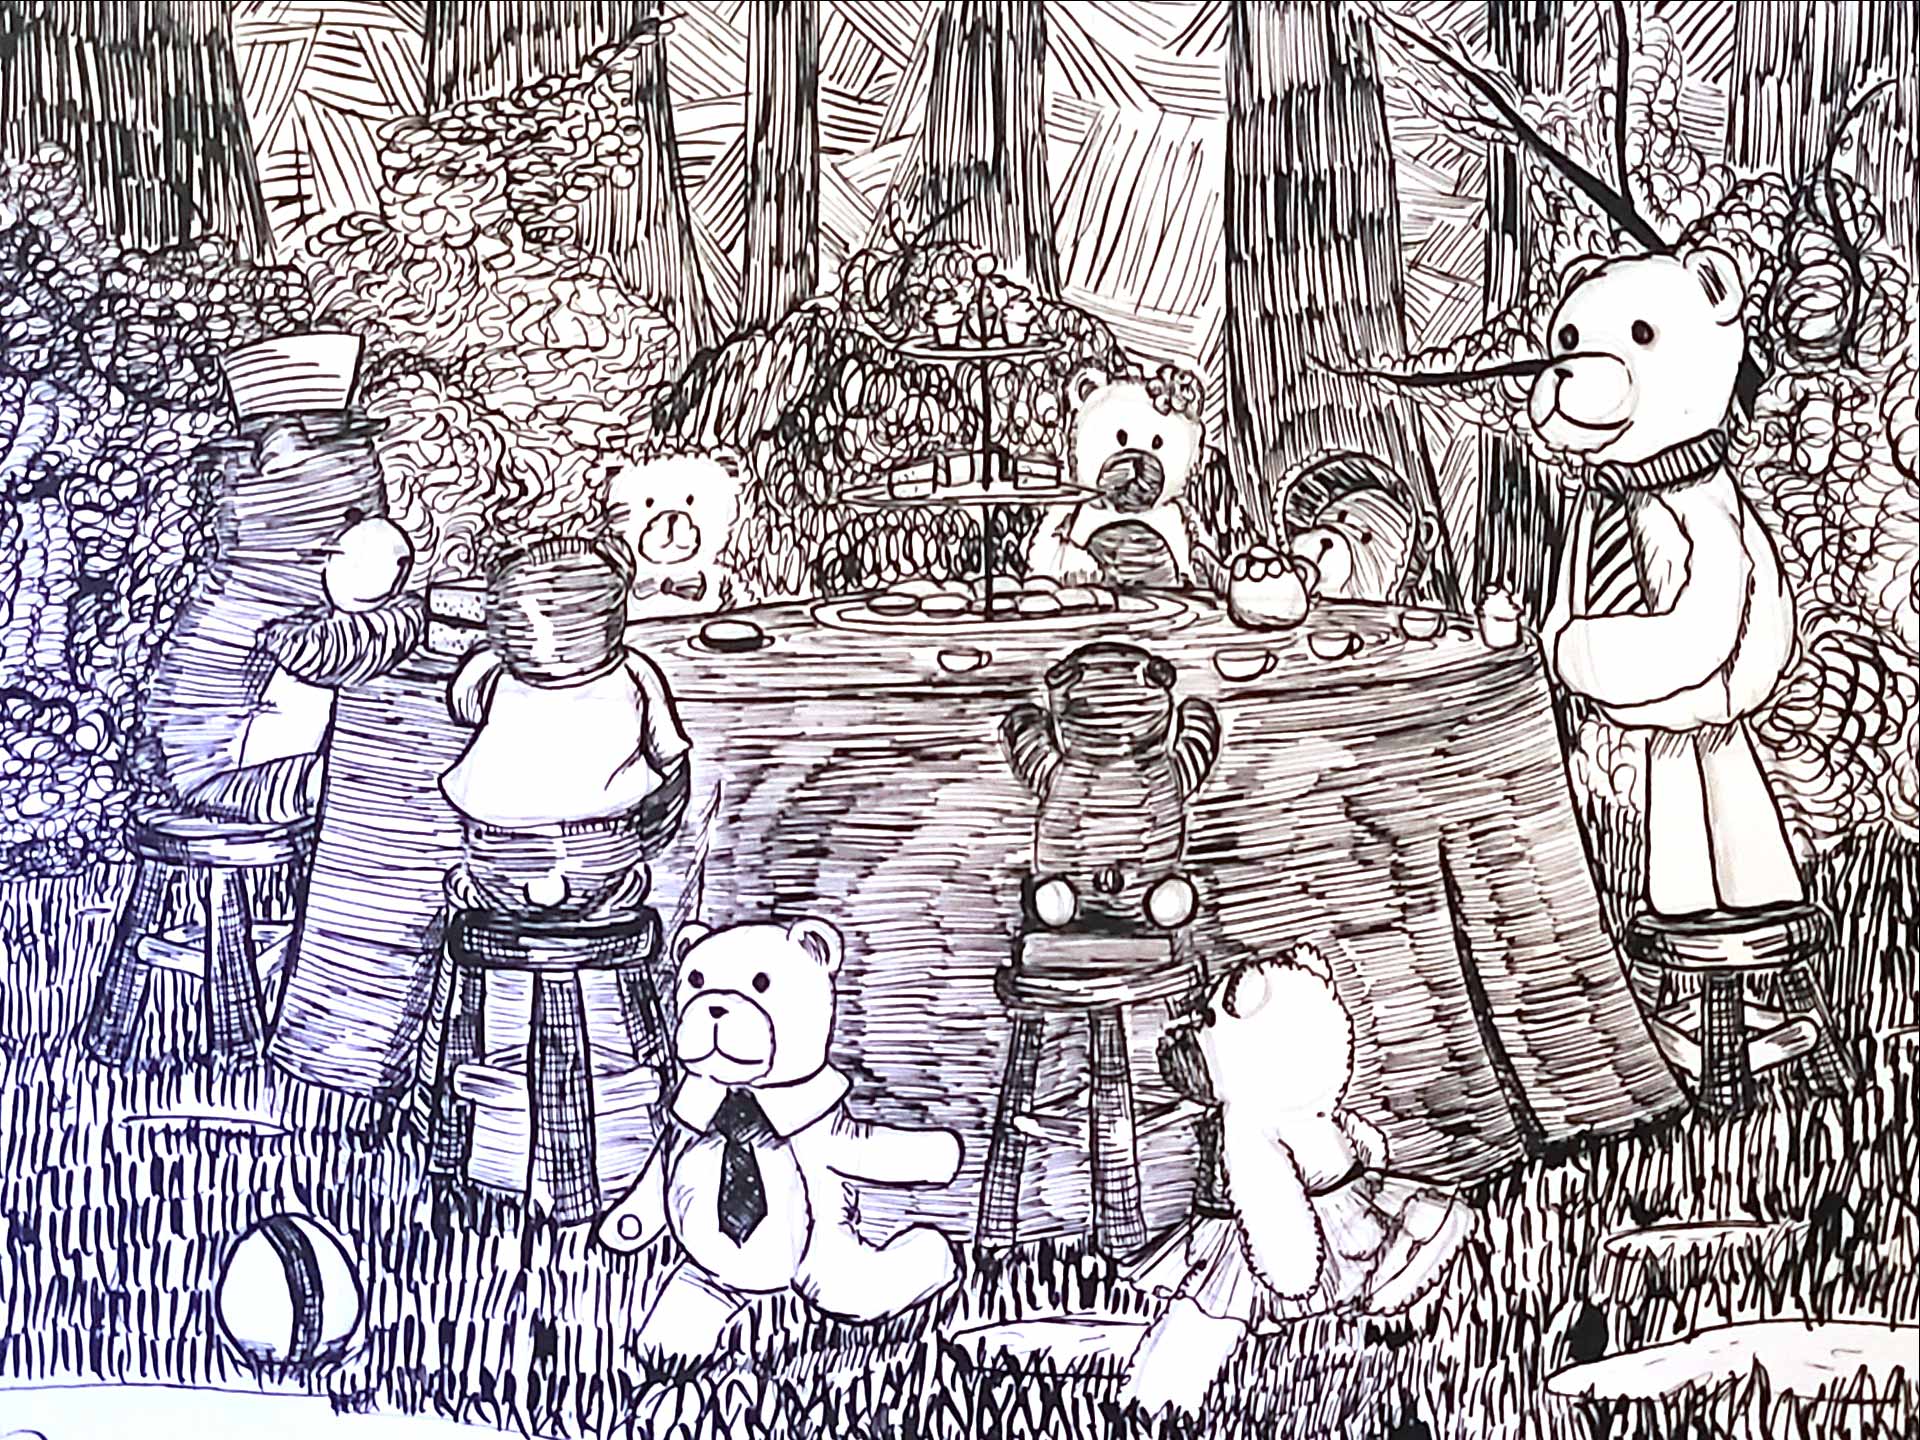 A cropped version of a dip pen illustration of several teddy bears having a picnic.